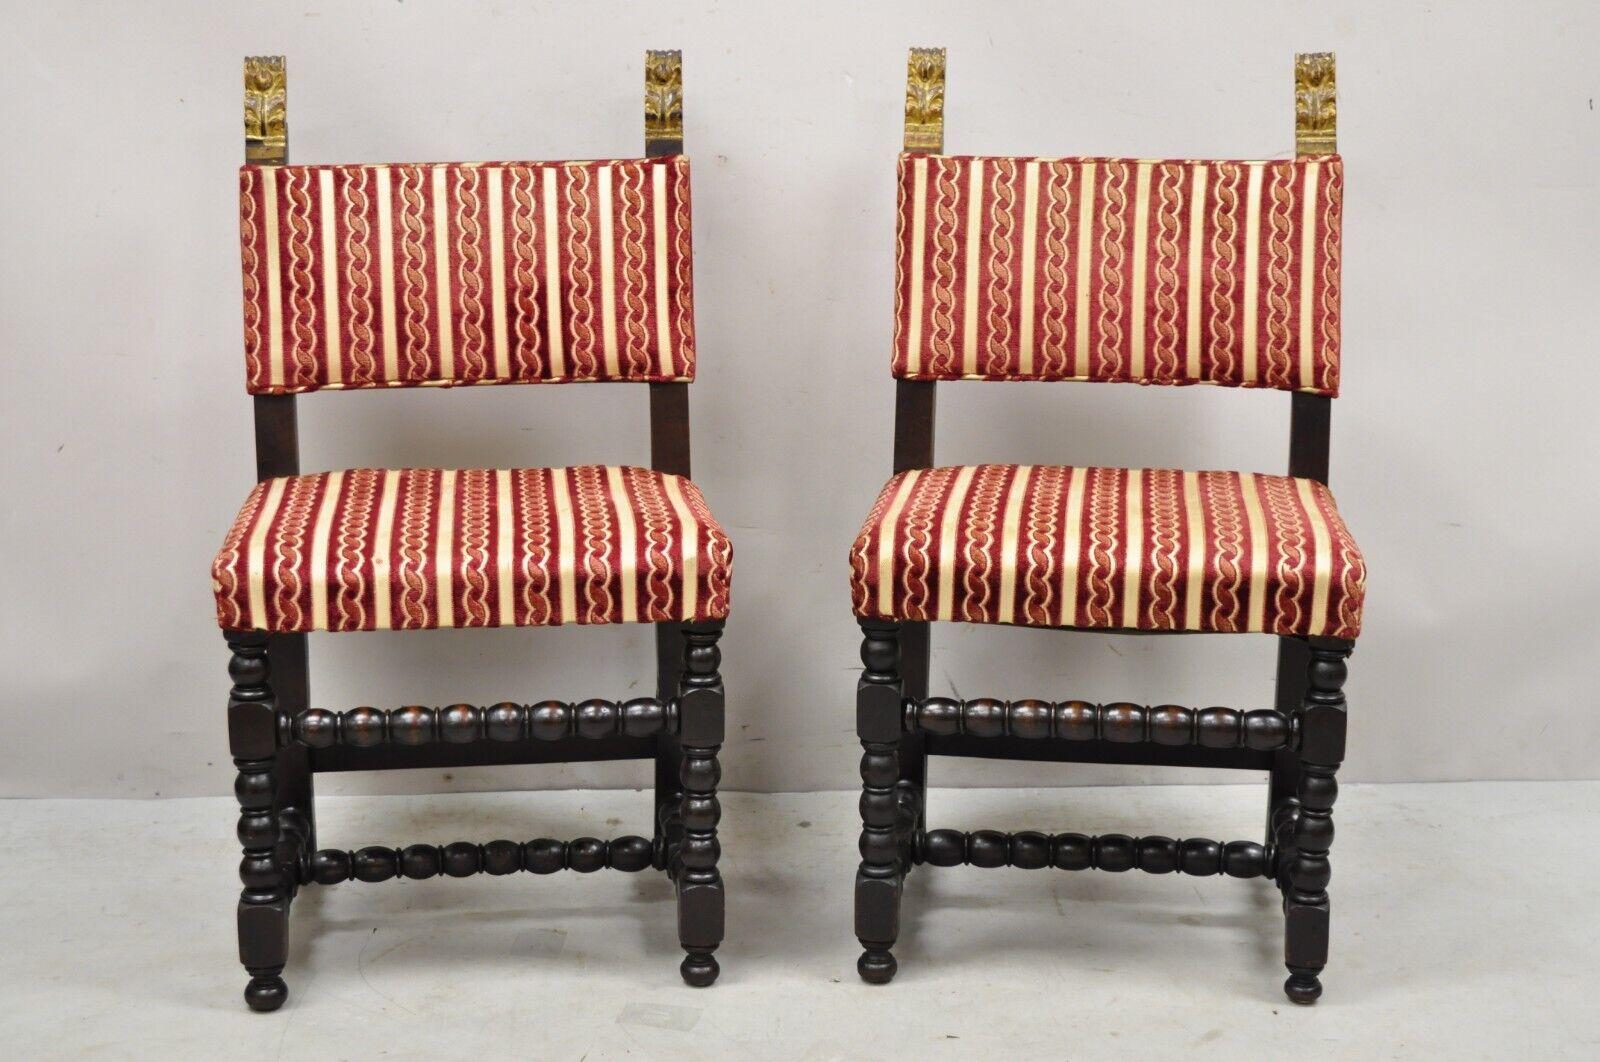 Antique Small Jacobean Style Turn Carved Walnut Accent Side Chairs - a Pair. Item featured is an nice small size, turn carved frame and stretcher base, gilt carved finials, solid wood frames, very nice antique pair, great style and form. Circa Early